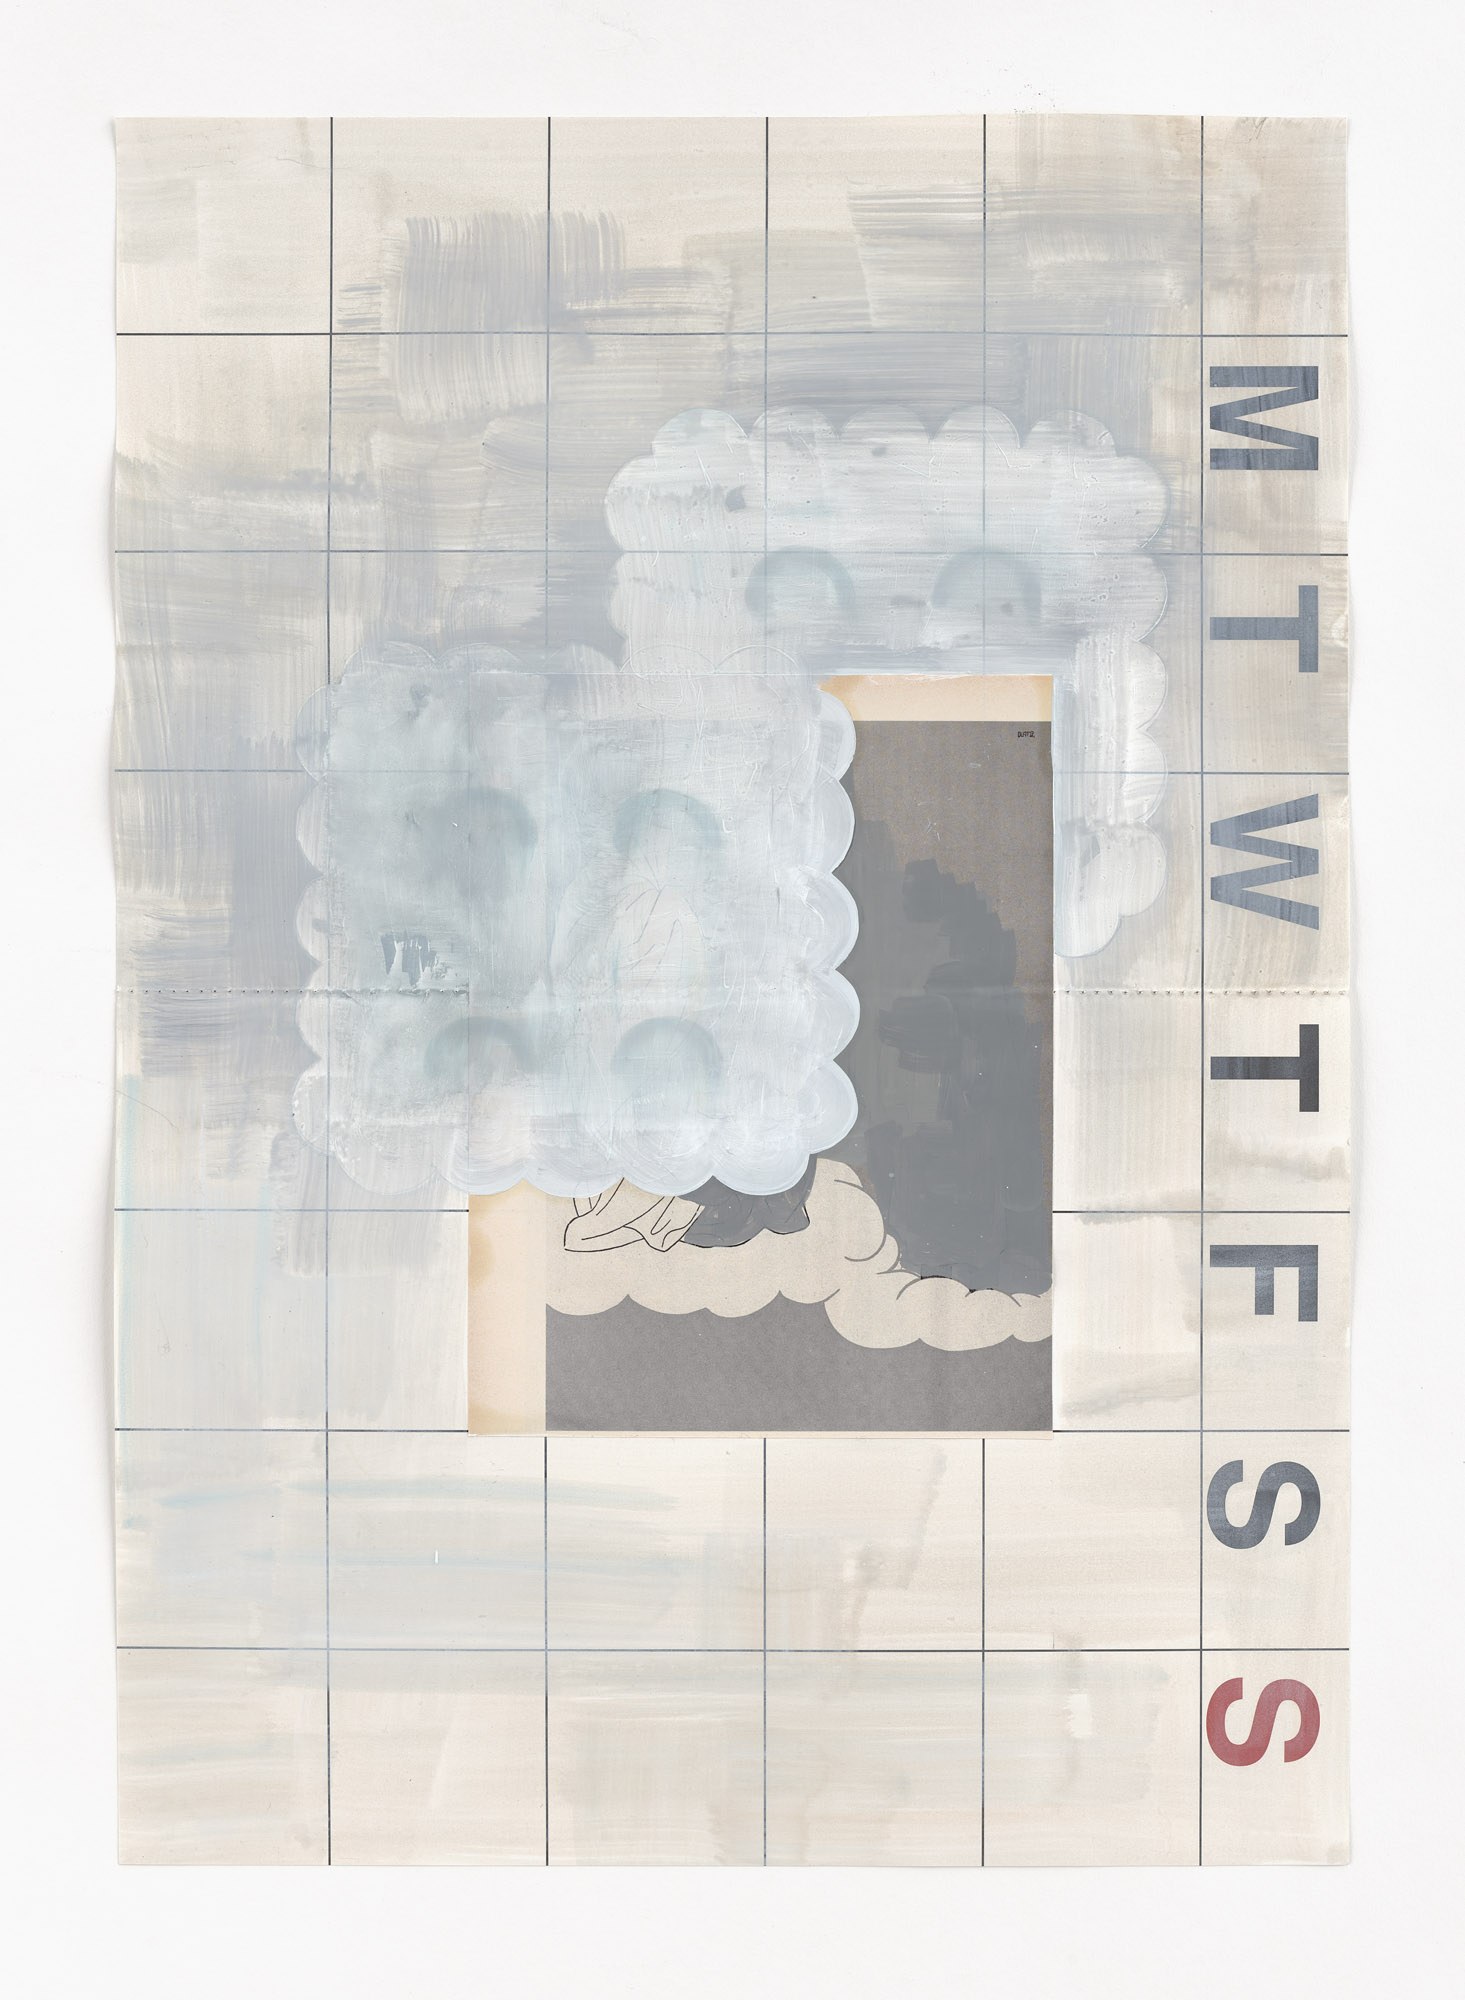 Anne Neukamp, Untitled (monthly planner #17), 2022, mixed media on calendar pages, 59 x 42 cm